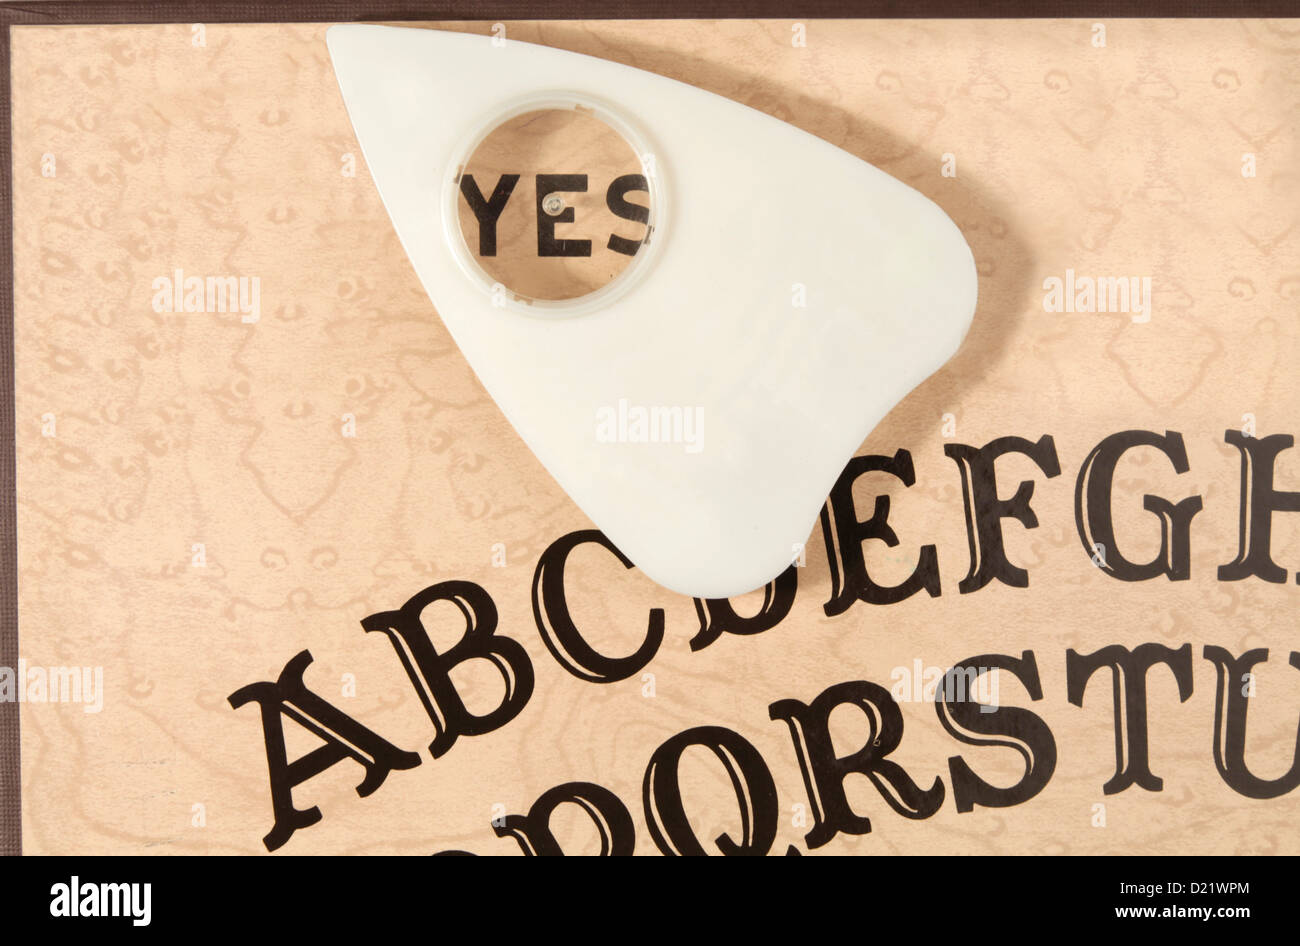 Ouija board with the planchette pointing to YES. This is the vintage Ouija board and classic arrangement of the letters. Stock Photo